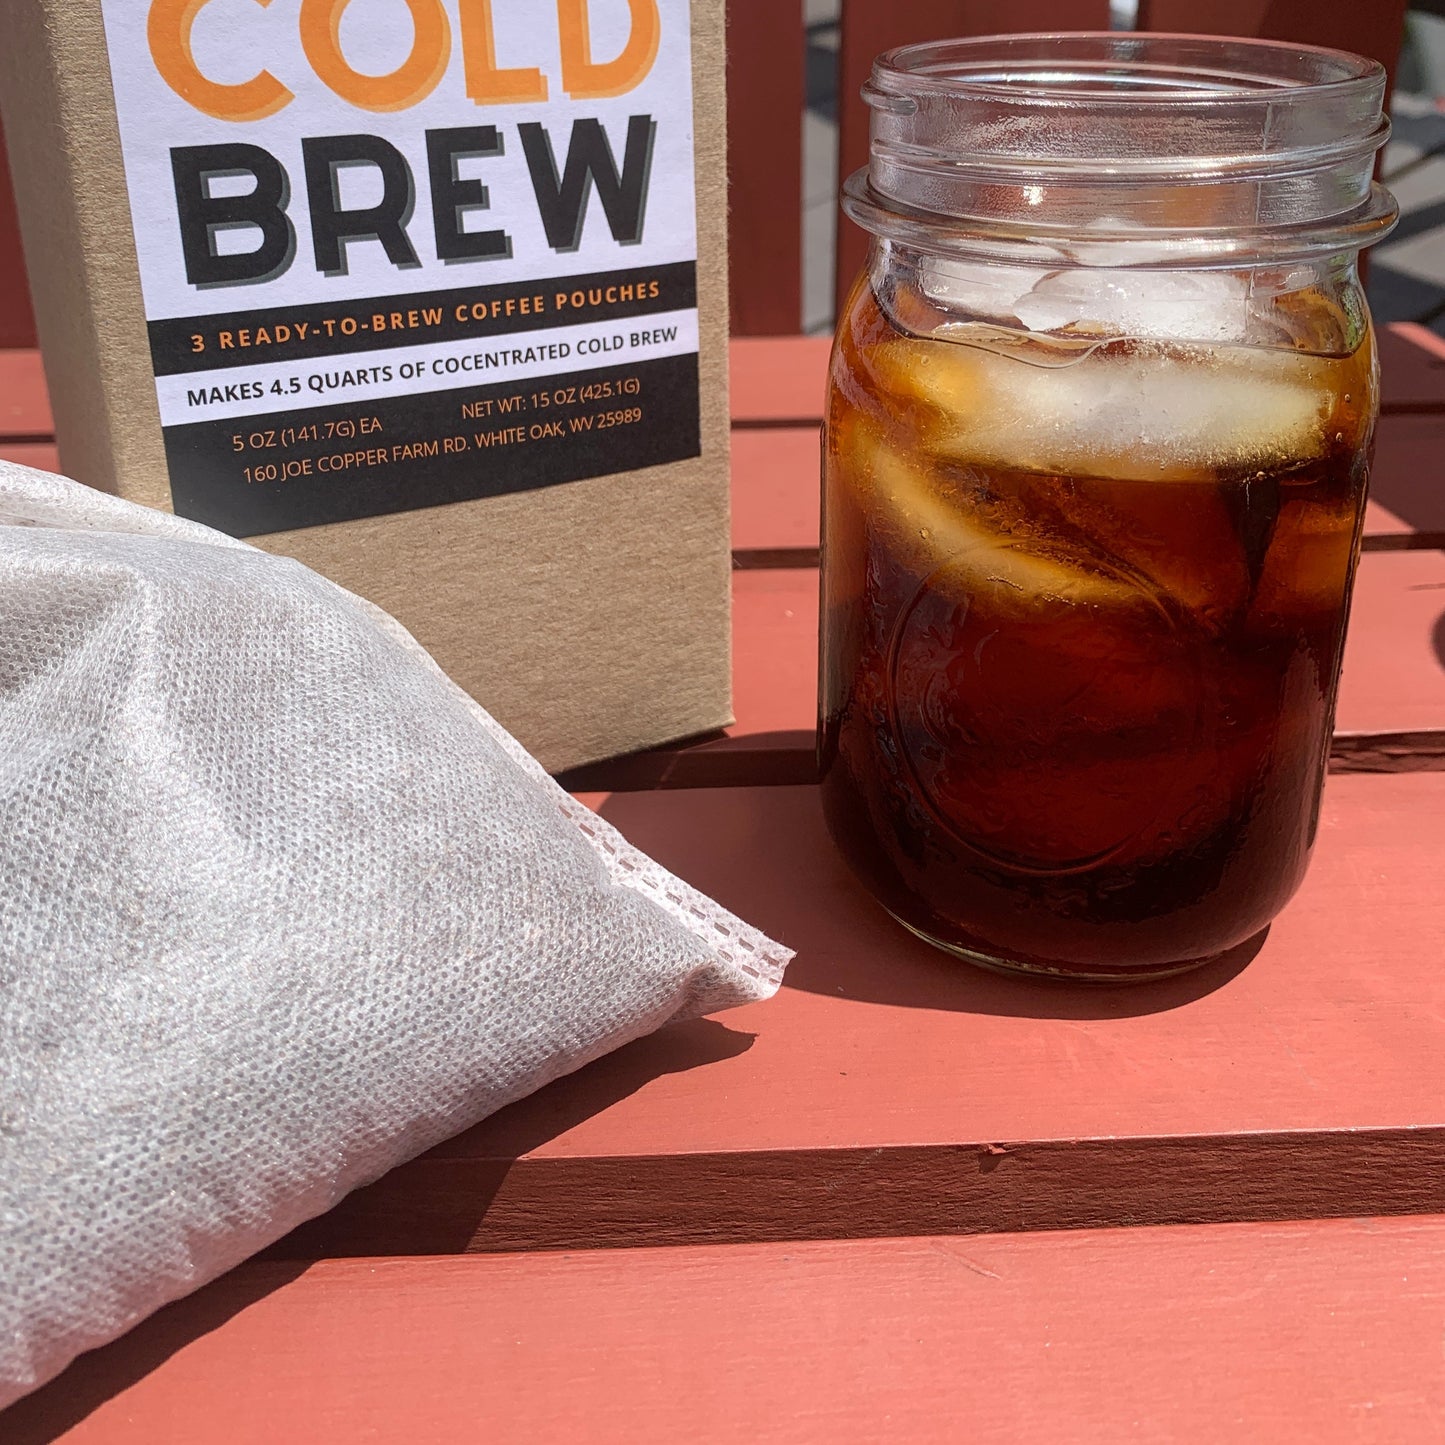 Cold Brew Pouches (3 count)